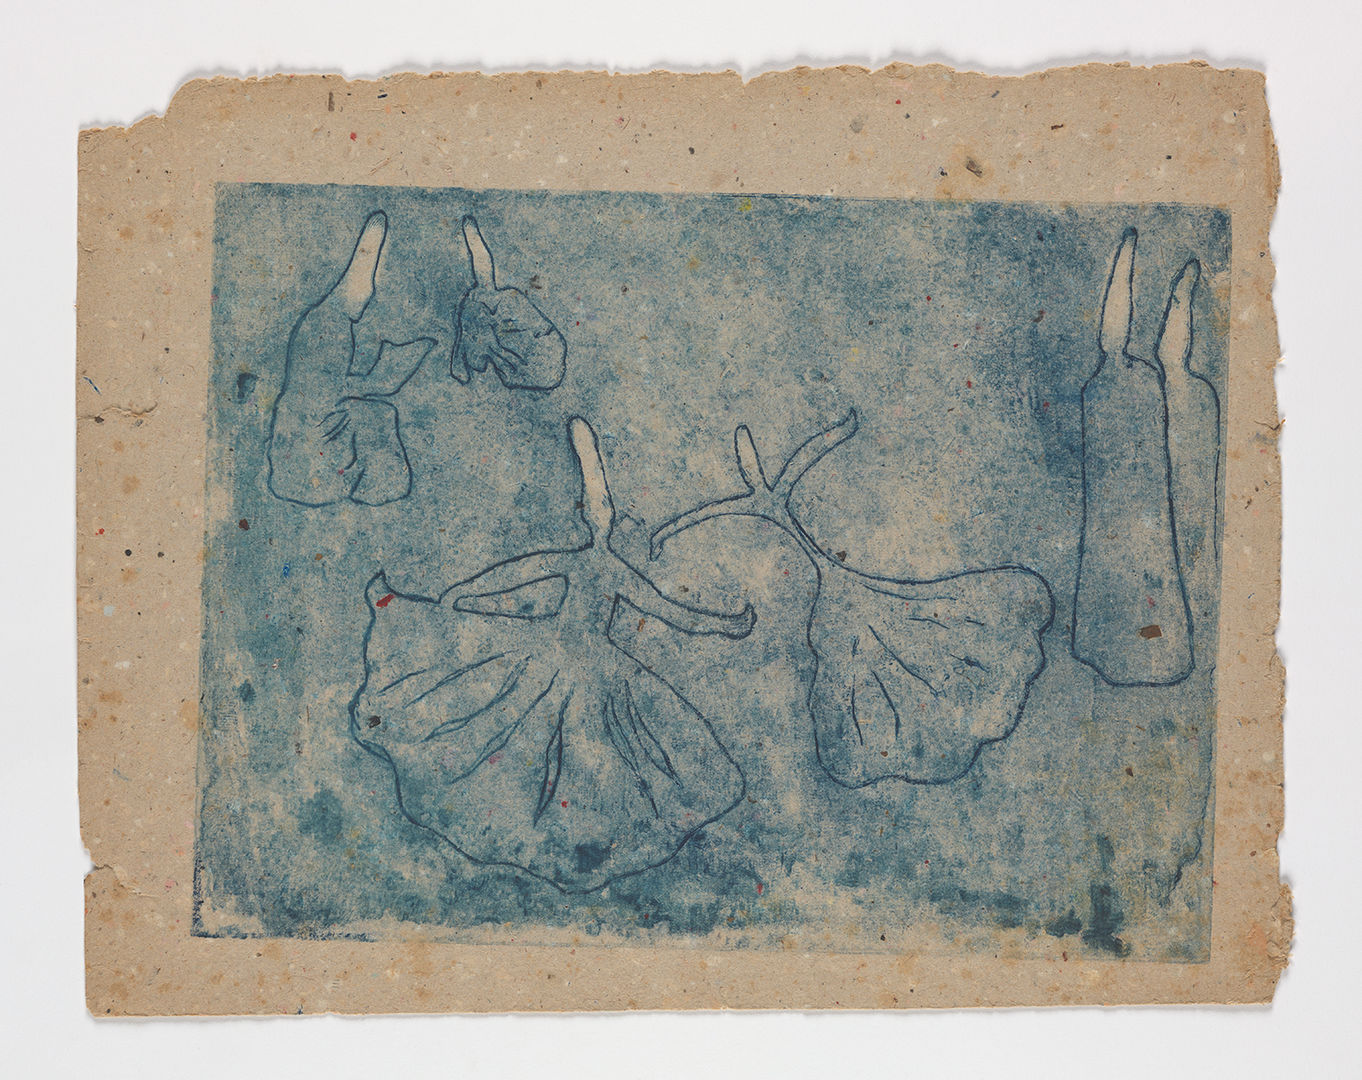 an etching on paper by Aliye Berger depicting two central dancing dervishes, two seated figures on the left, and two standing figures on the right in a field of blue on speckled tan paper